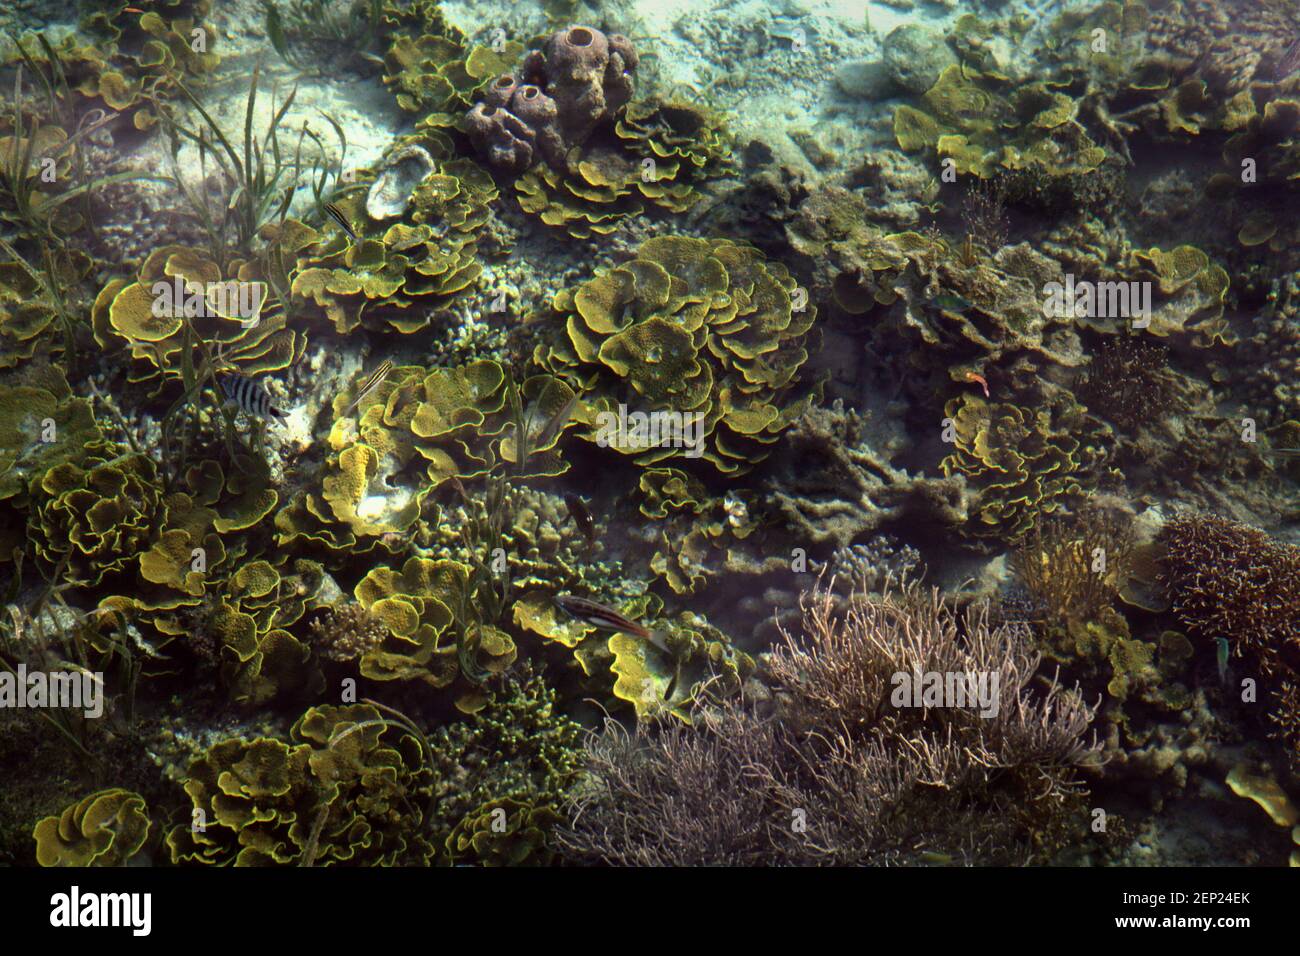 Coral reefs on the bed of coastal water photographed from a jetty in Sawai village, Central Maluku, Maluku province, Indonesia. Stock Photo